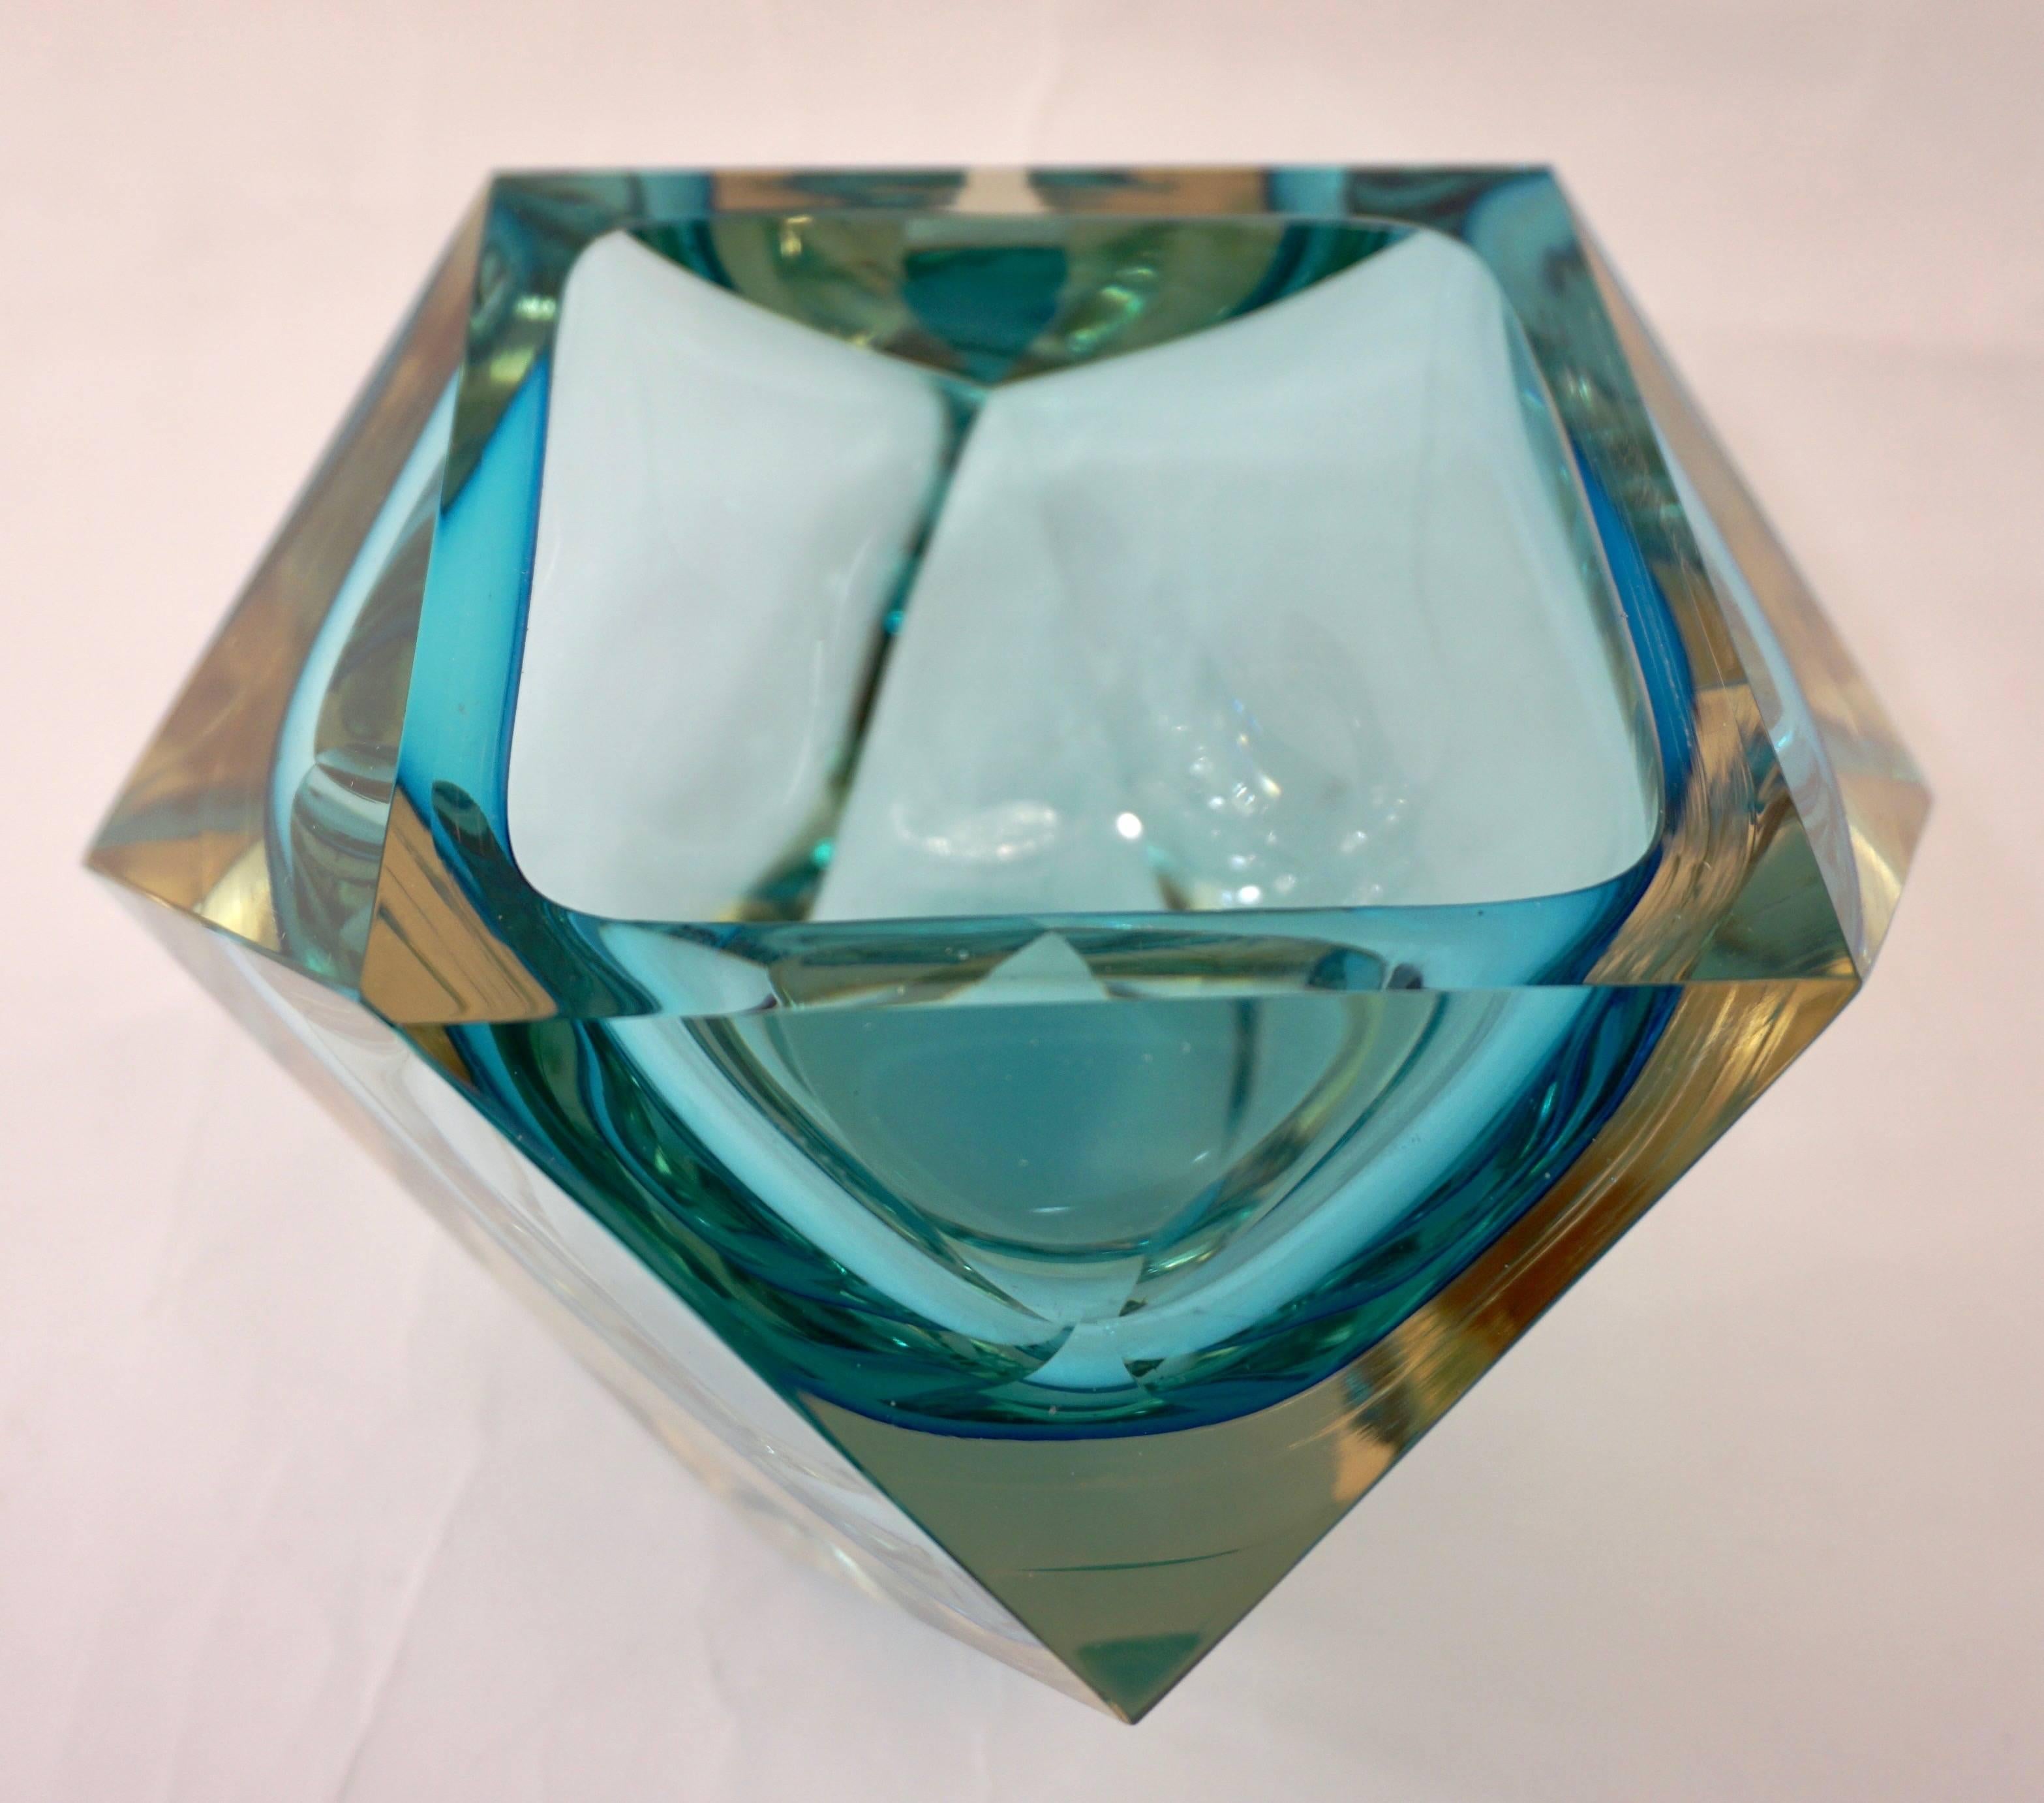 1950s, Italian diamond faceted art glass catchall/paperweight by Seguso in hand-cut Murano Glass, a very decorative bowl with a diamond multifaceted exterior which catches the light like a prism. This precious piece has a flat cut polished top with